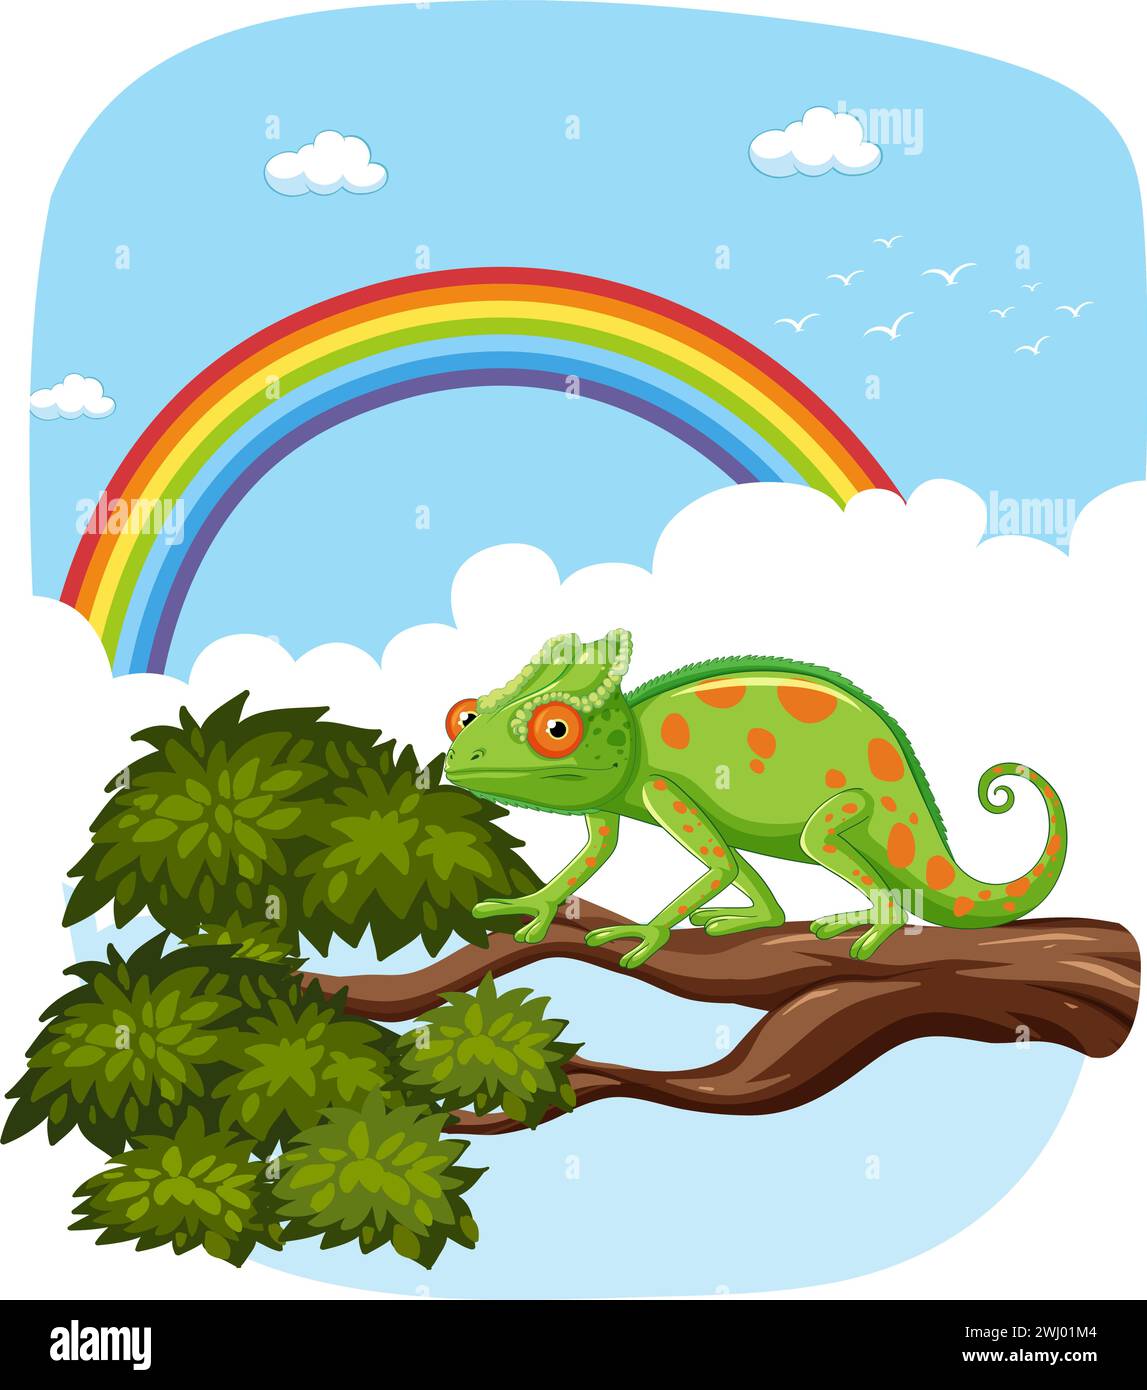 Colorful chameleon on a tree branch, rainbow background Stock Vector